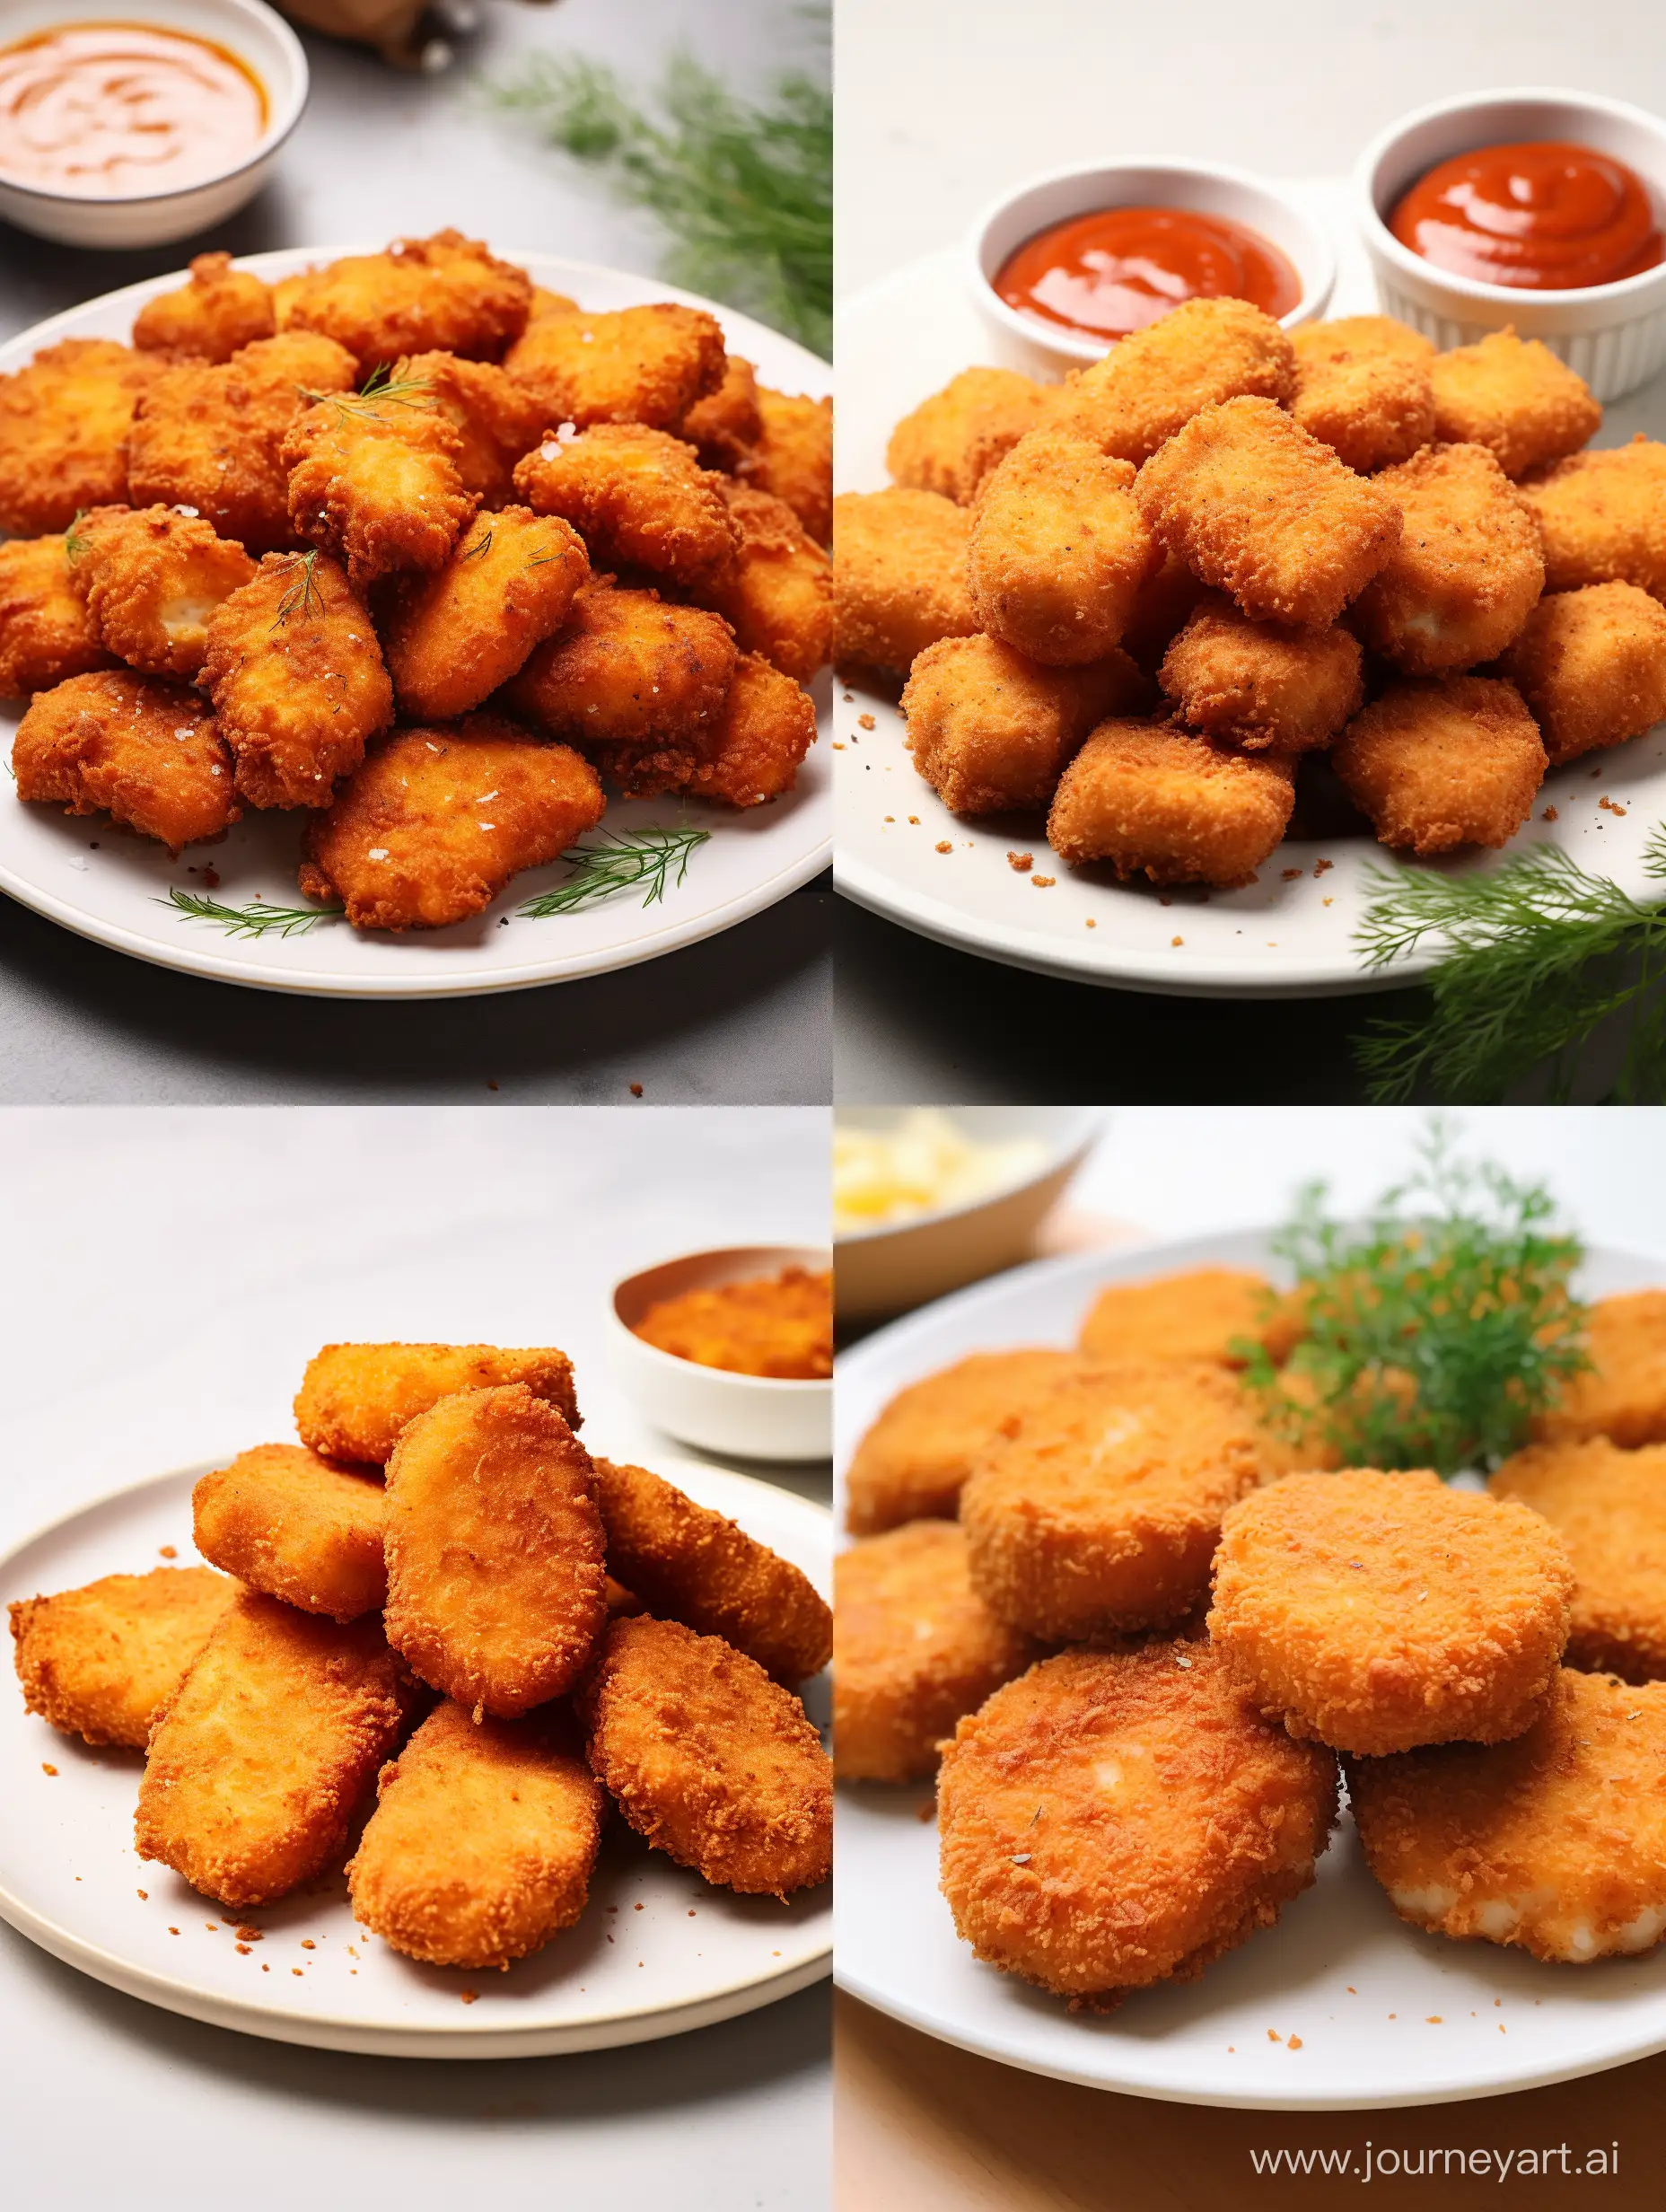 Crispy-Breaded-Chicken-Nuggets-on-White-Plate-Professional-Food-Photo